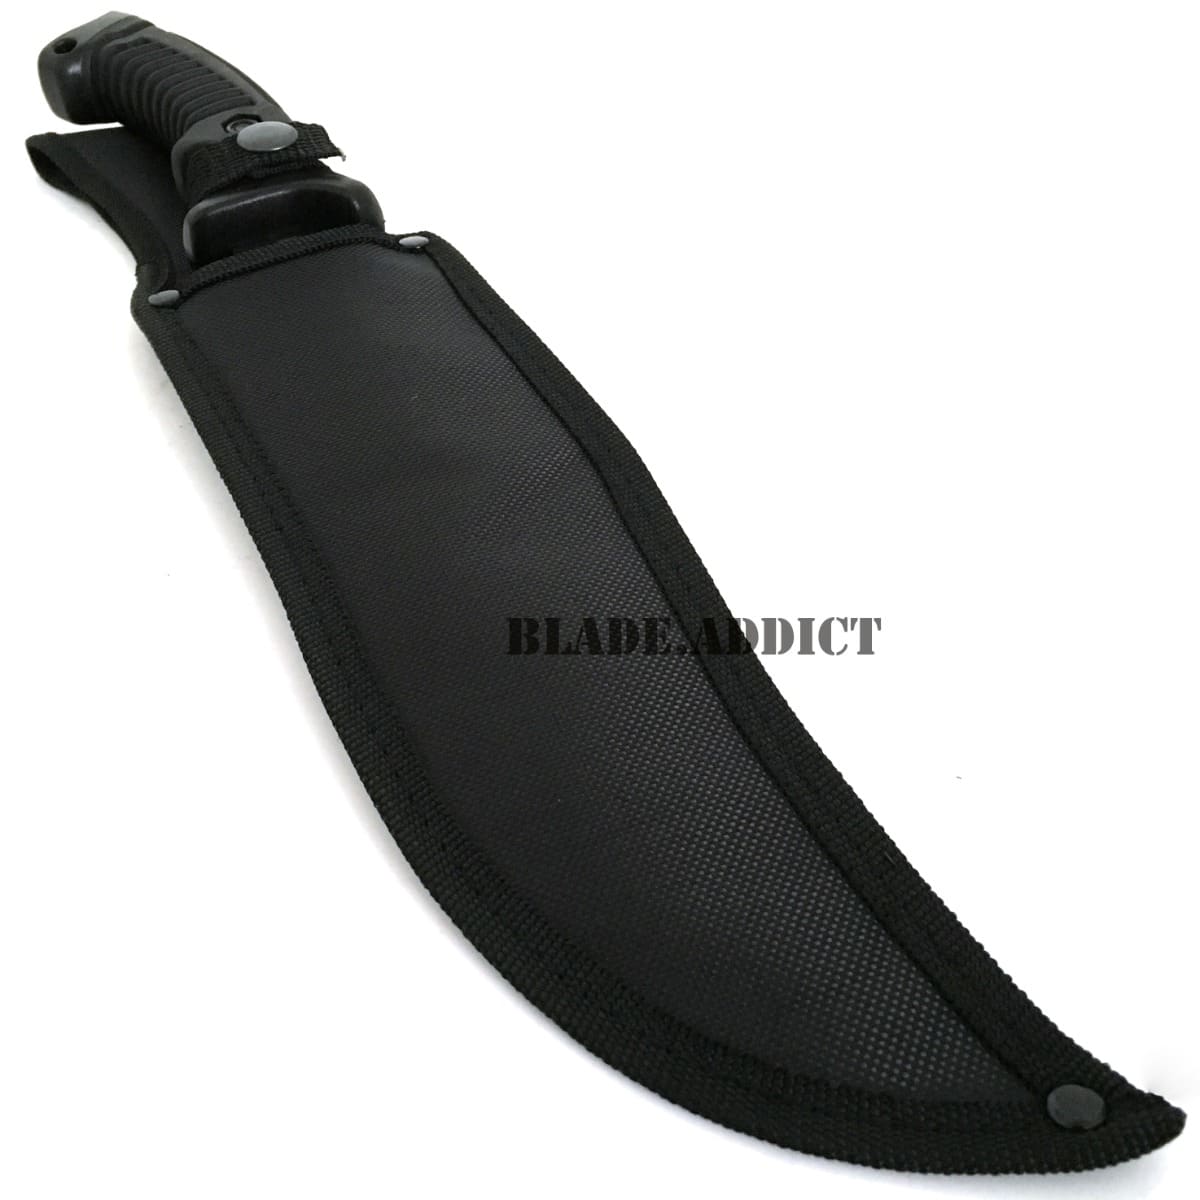 16" TACTICAL HUNTING SURVIVAL RAMBO FIXED BLADE MACHETE KNIFE Camping Axe